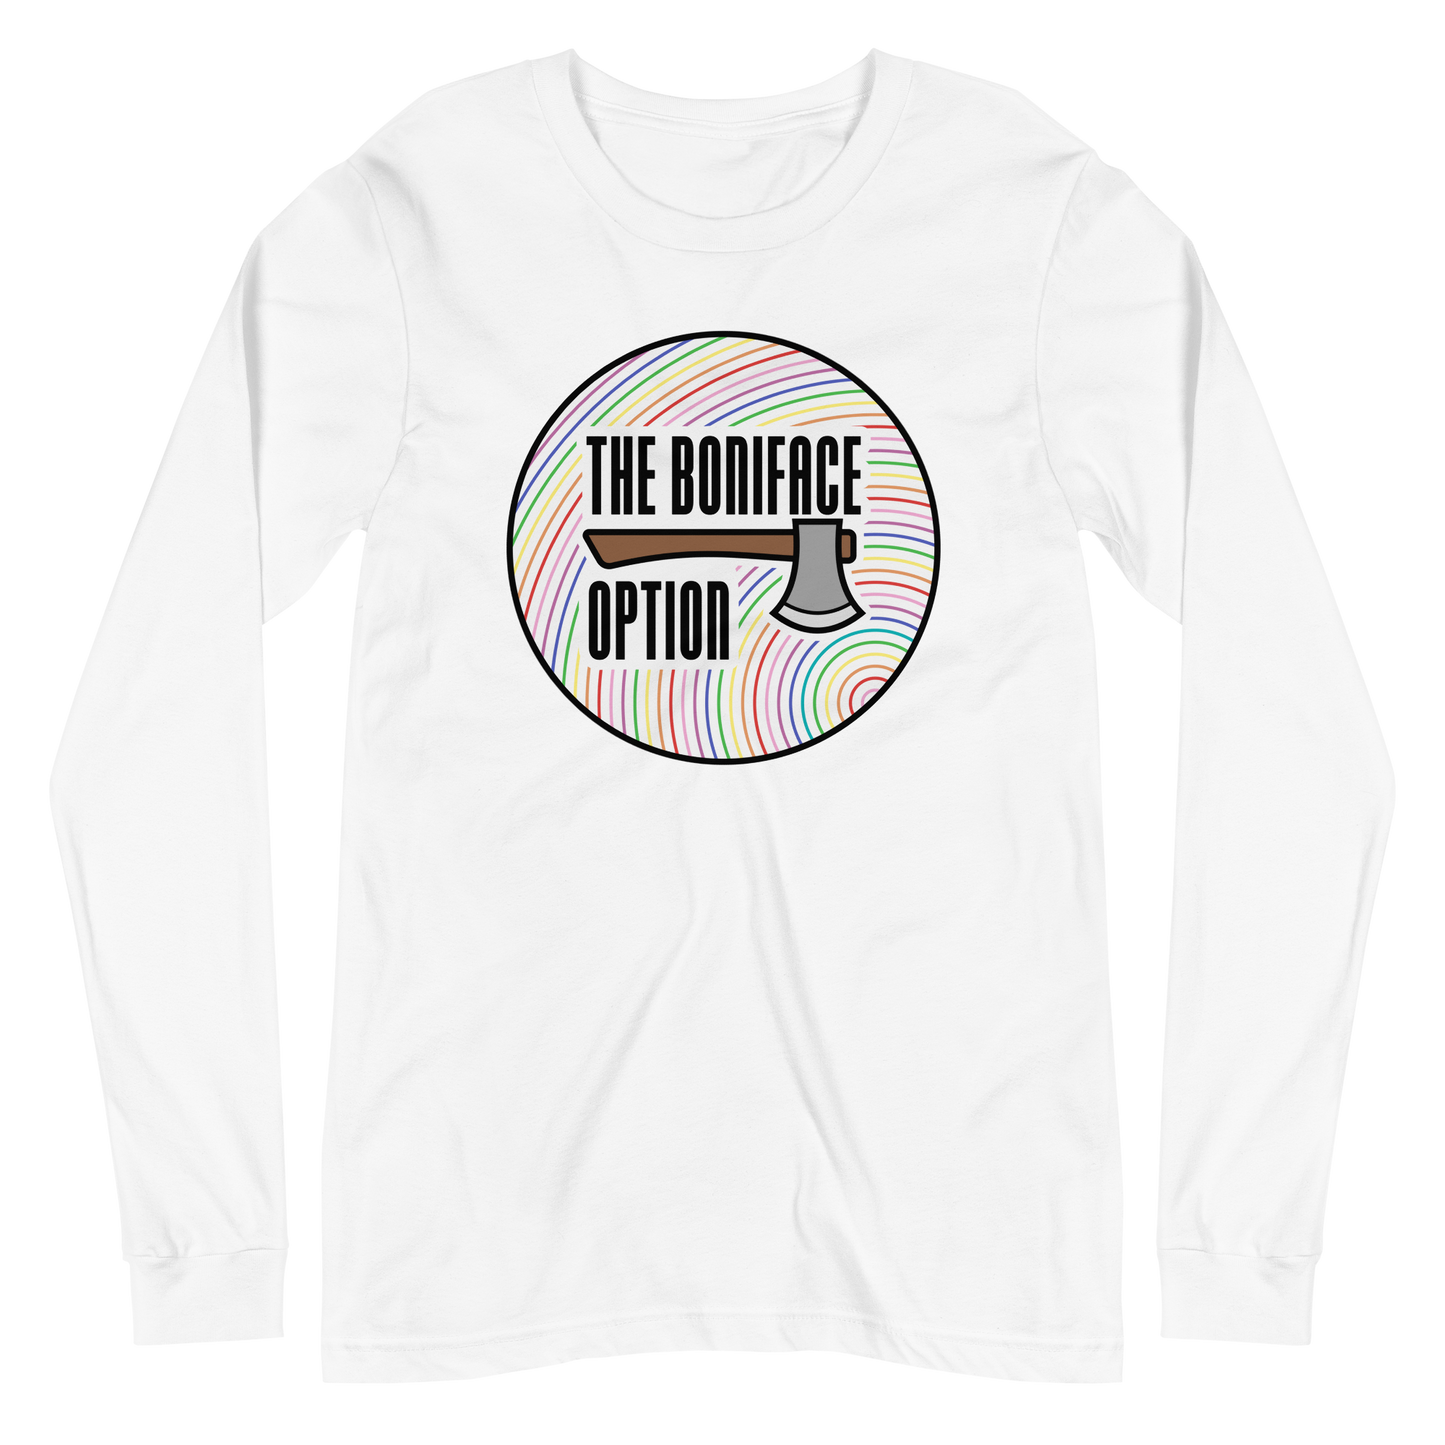 The Boniface Option Long Sleeve Shirt (Front Only)